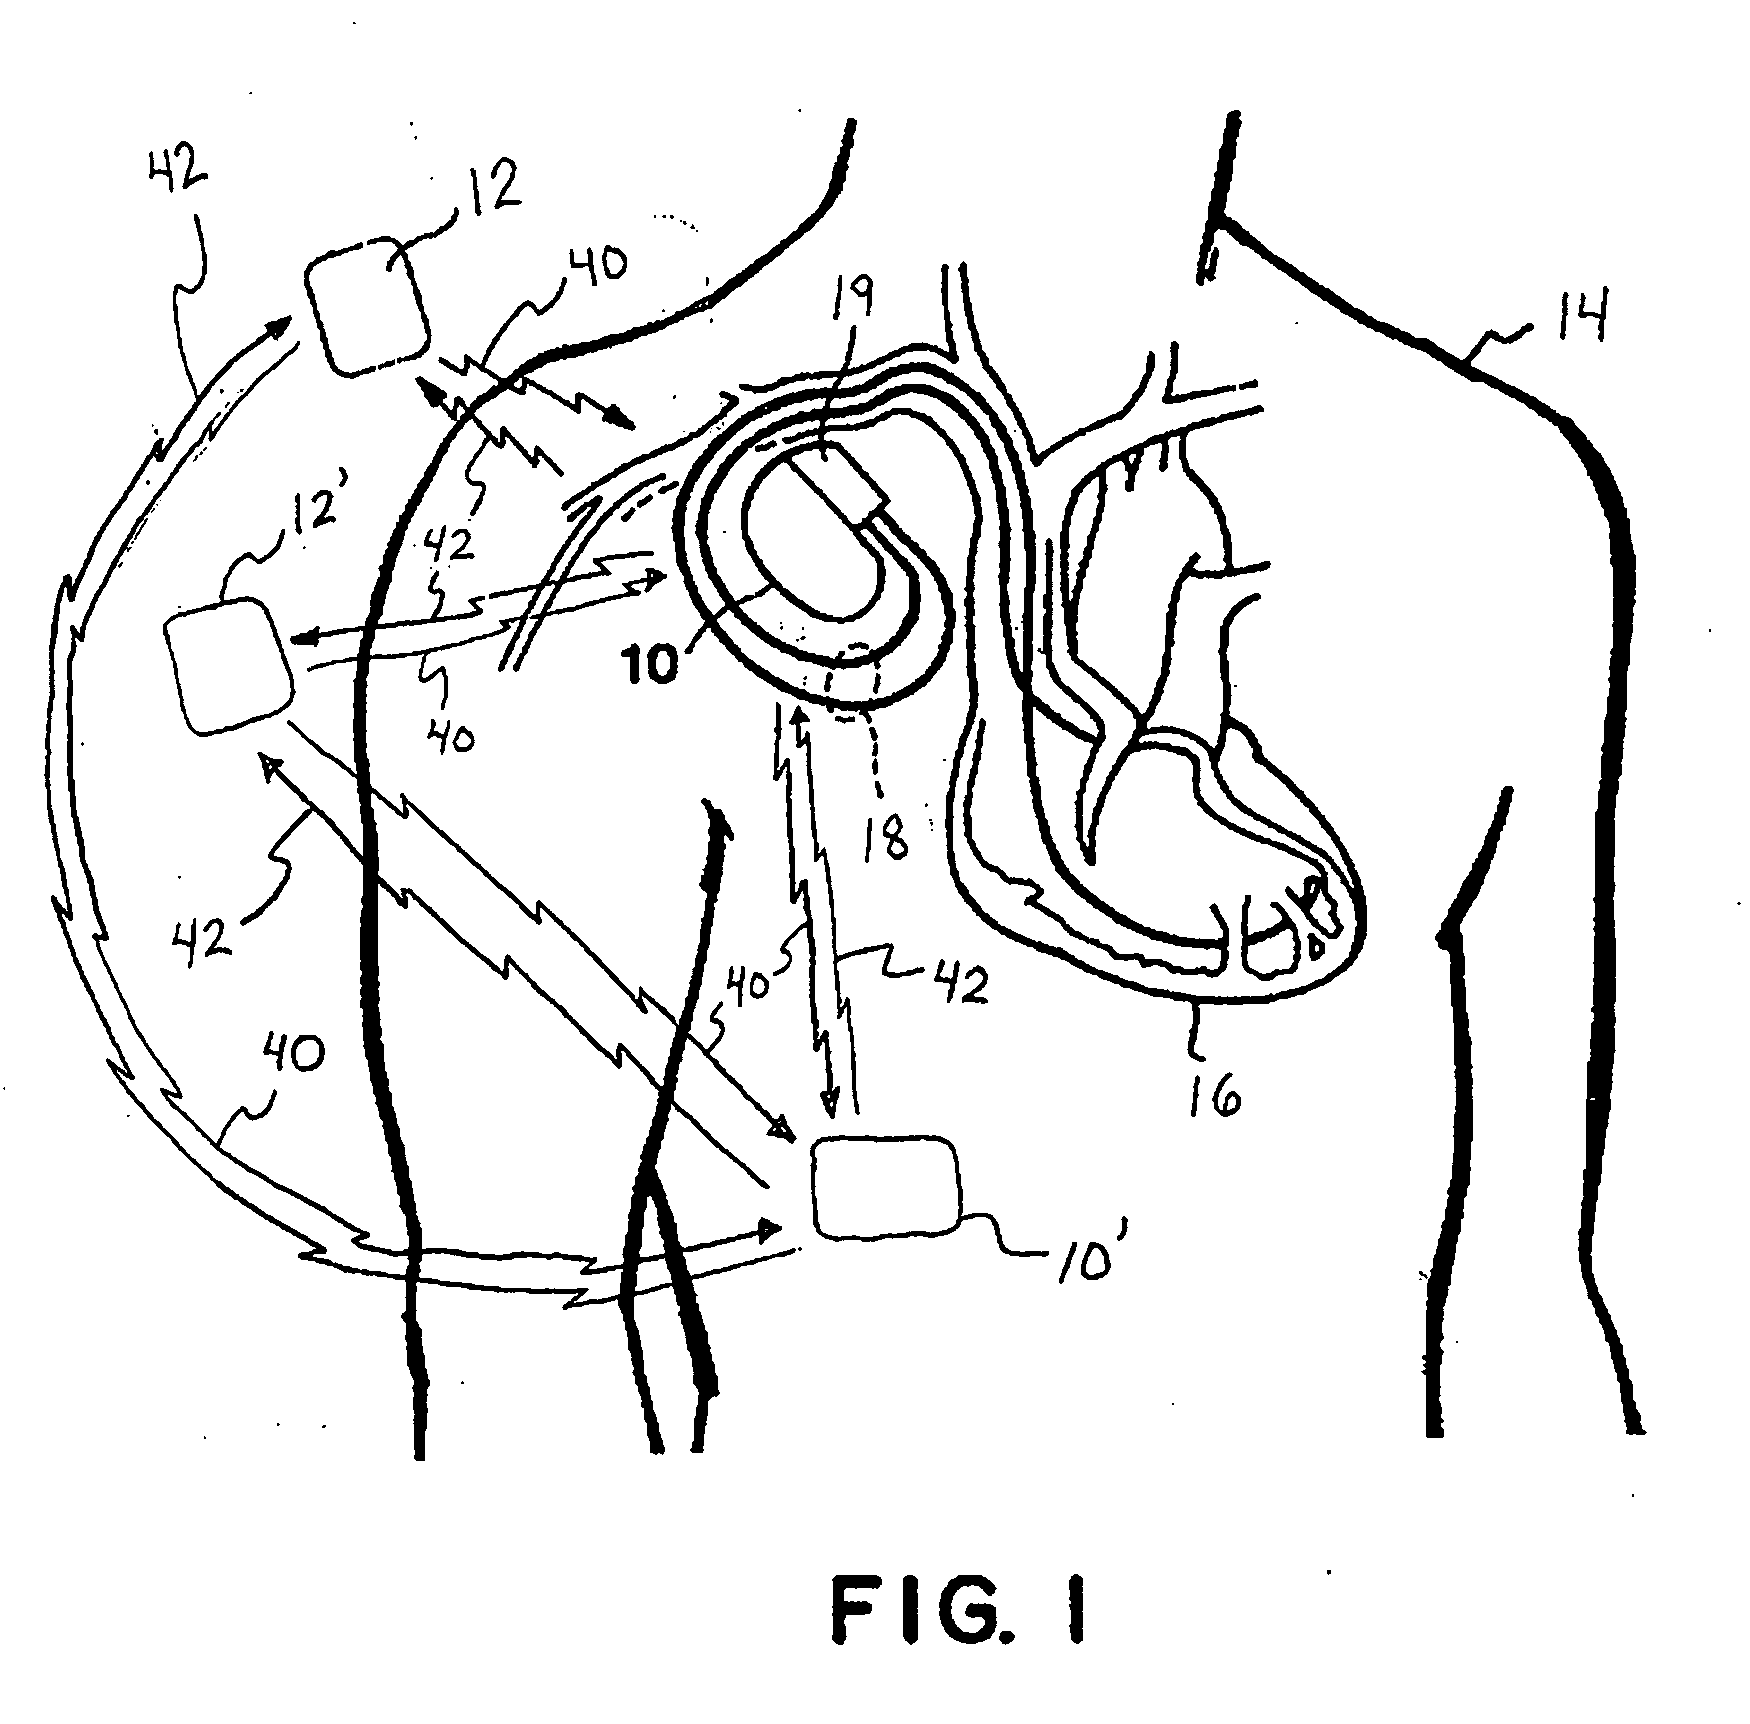 Protocol implementation for telemetry communications involving implantable medical devices